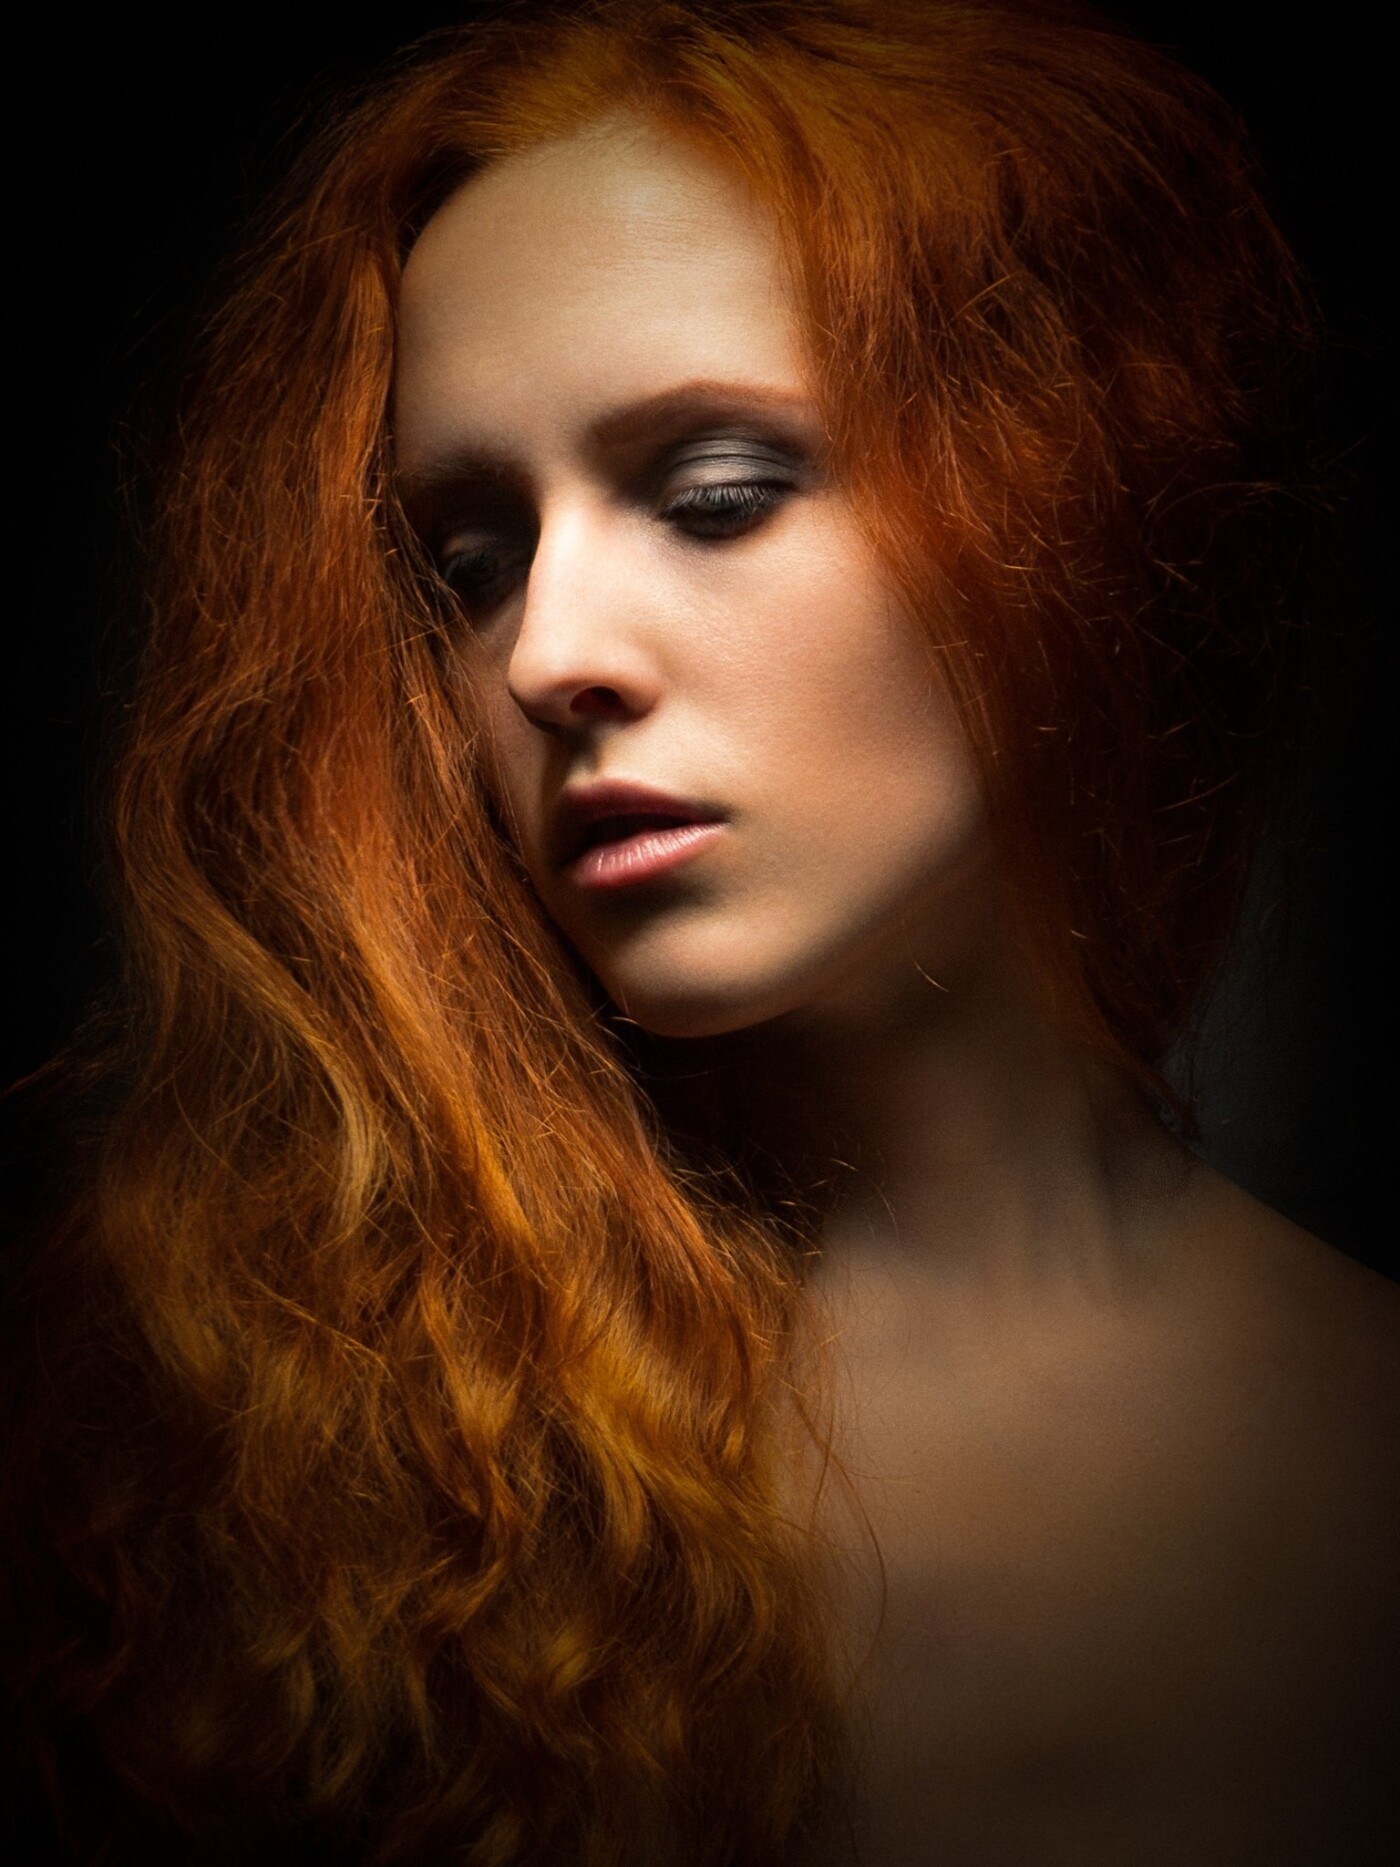 For this picture I experimented a lot with the light. At first I wanted the light to be very tight and close around the face, so I put the spot only on her face. But when I saw how beautiful and stunning the red hair looked, I changed that idea. When I look at the final result I’m very glad, I didn’t stick to that initial idea and stayed flexible in the process.